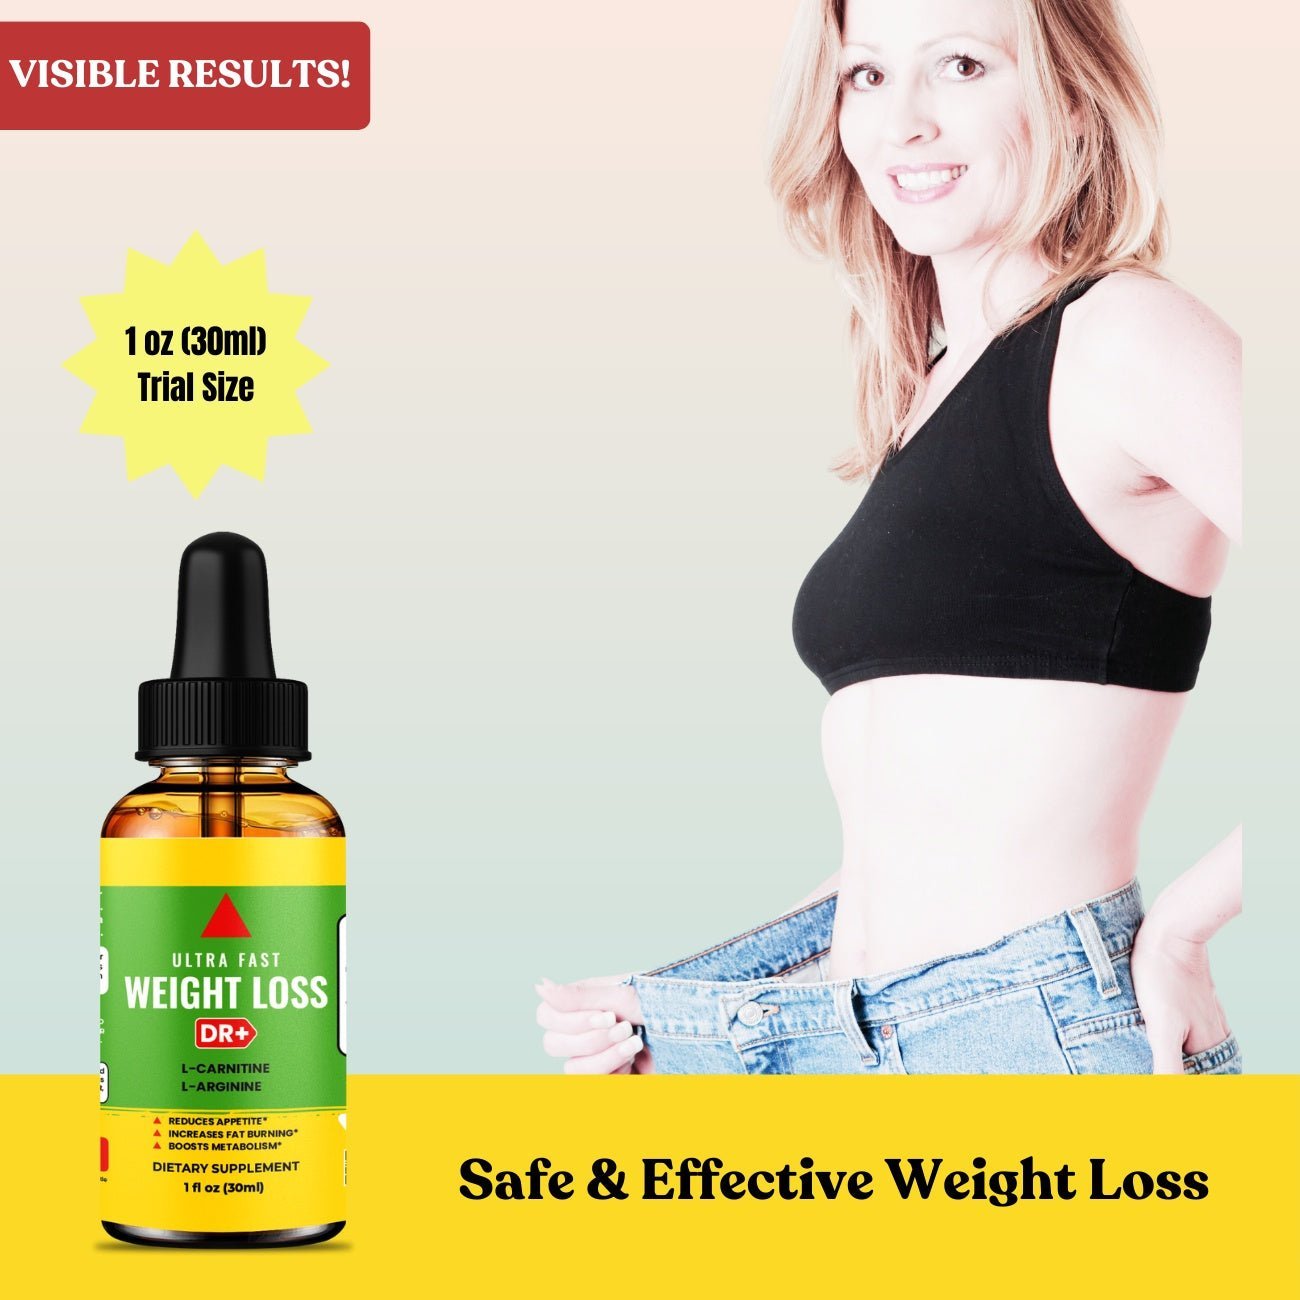 Diet Drops - Suppress Appetite, Burn Fat, Boost Energy - Fast Results | 2-Pack - Herblif Nutrition USA